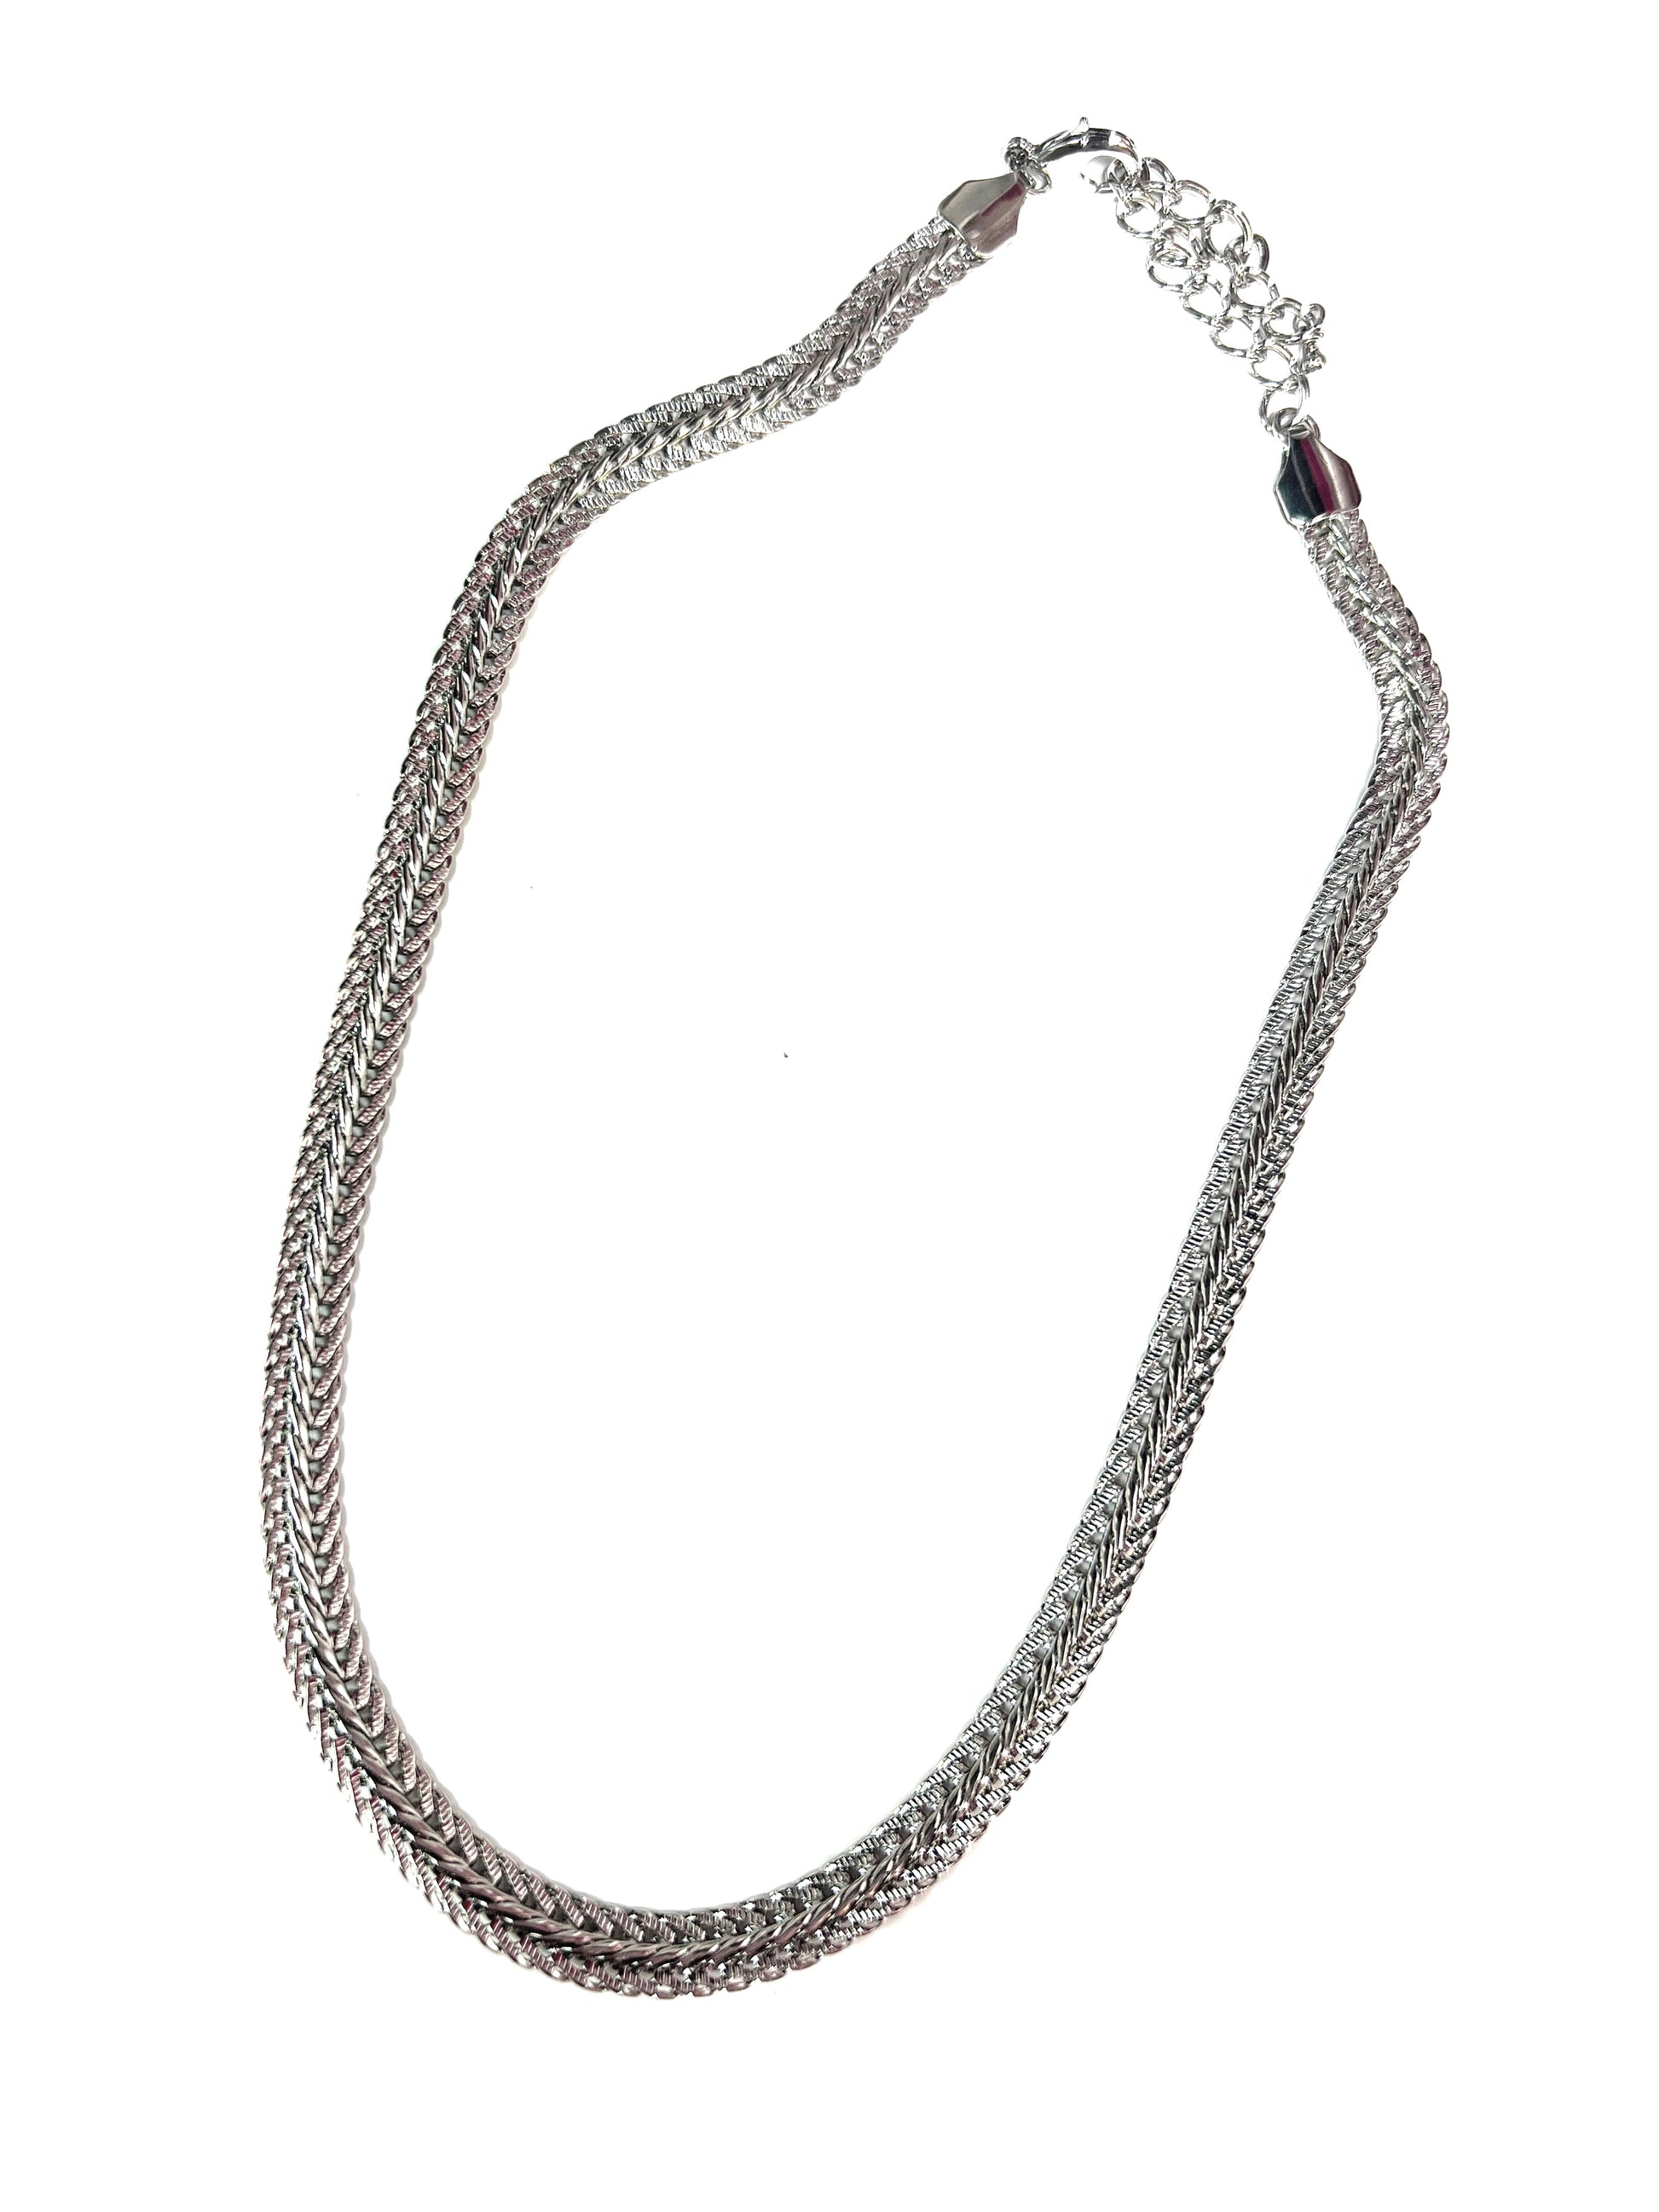 Silver Wide Herringbone Necklace-Necklaces-Kenze Pannee--The Twisted Chandelier